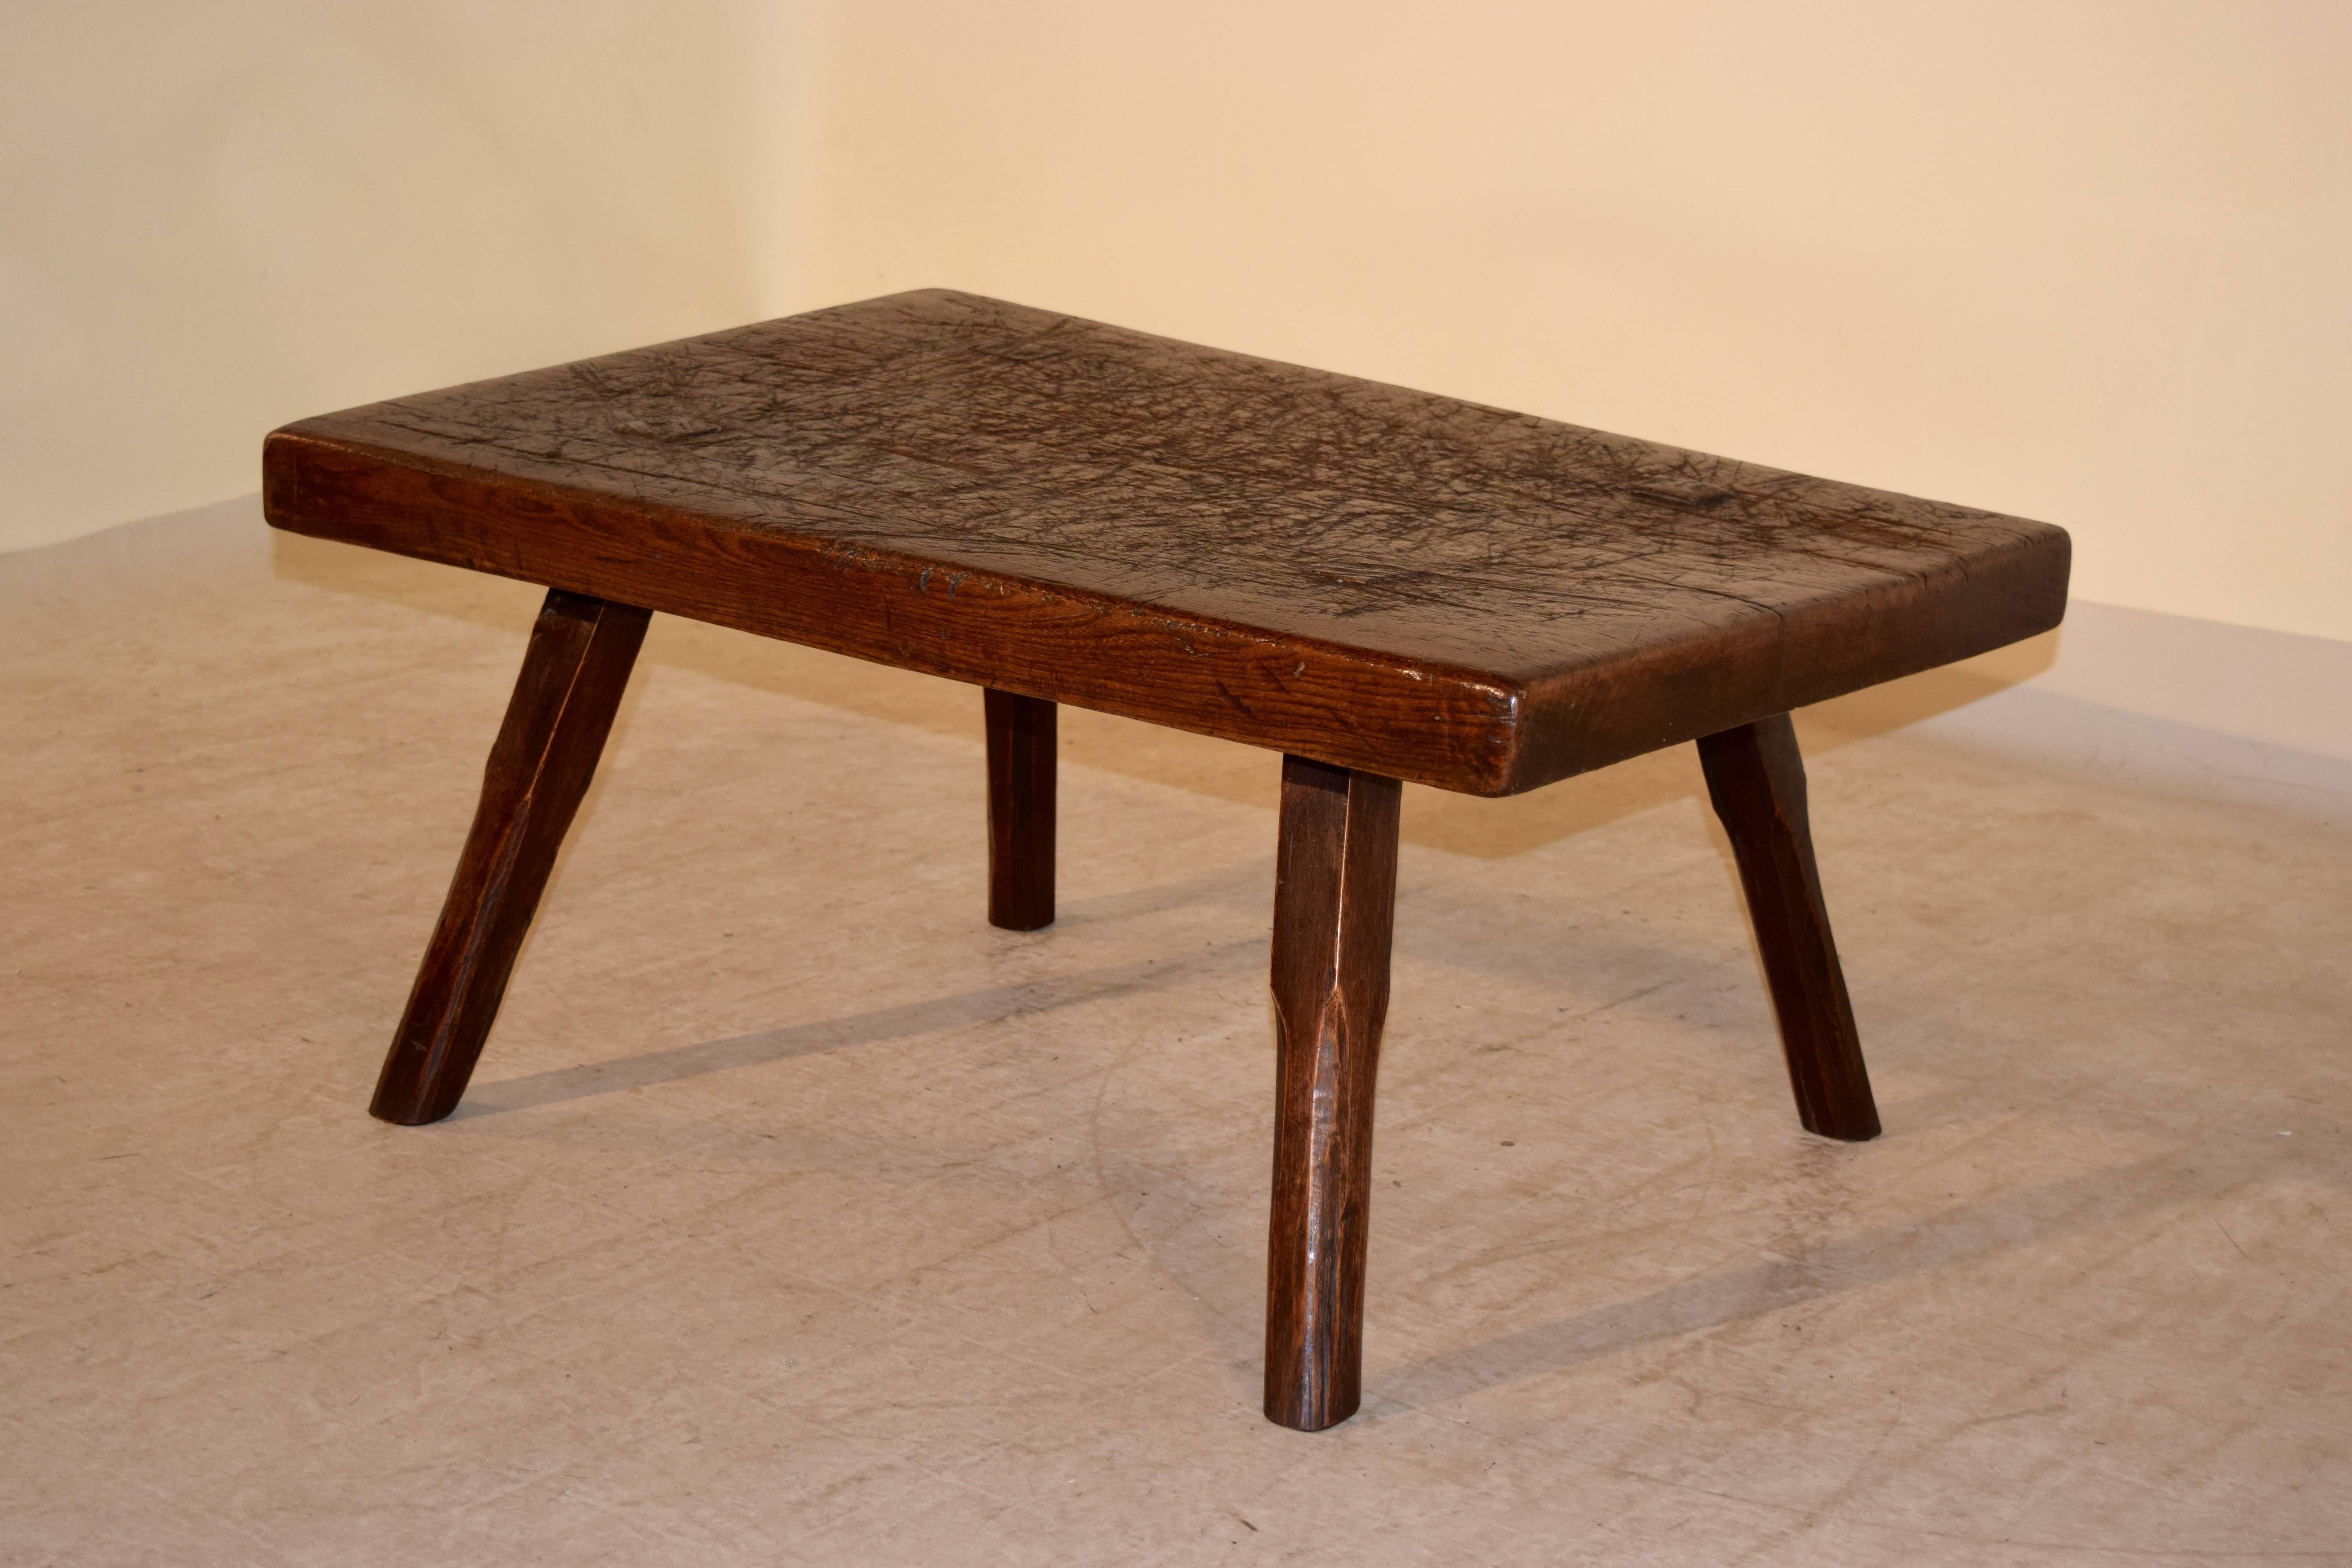 Mid-19th century English large choosing block, which has had legs added to make it into a coffee table. The top is a solid block and has multiple old cuts and scarring from actual use. The pegging is a wonderful detail to see.